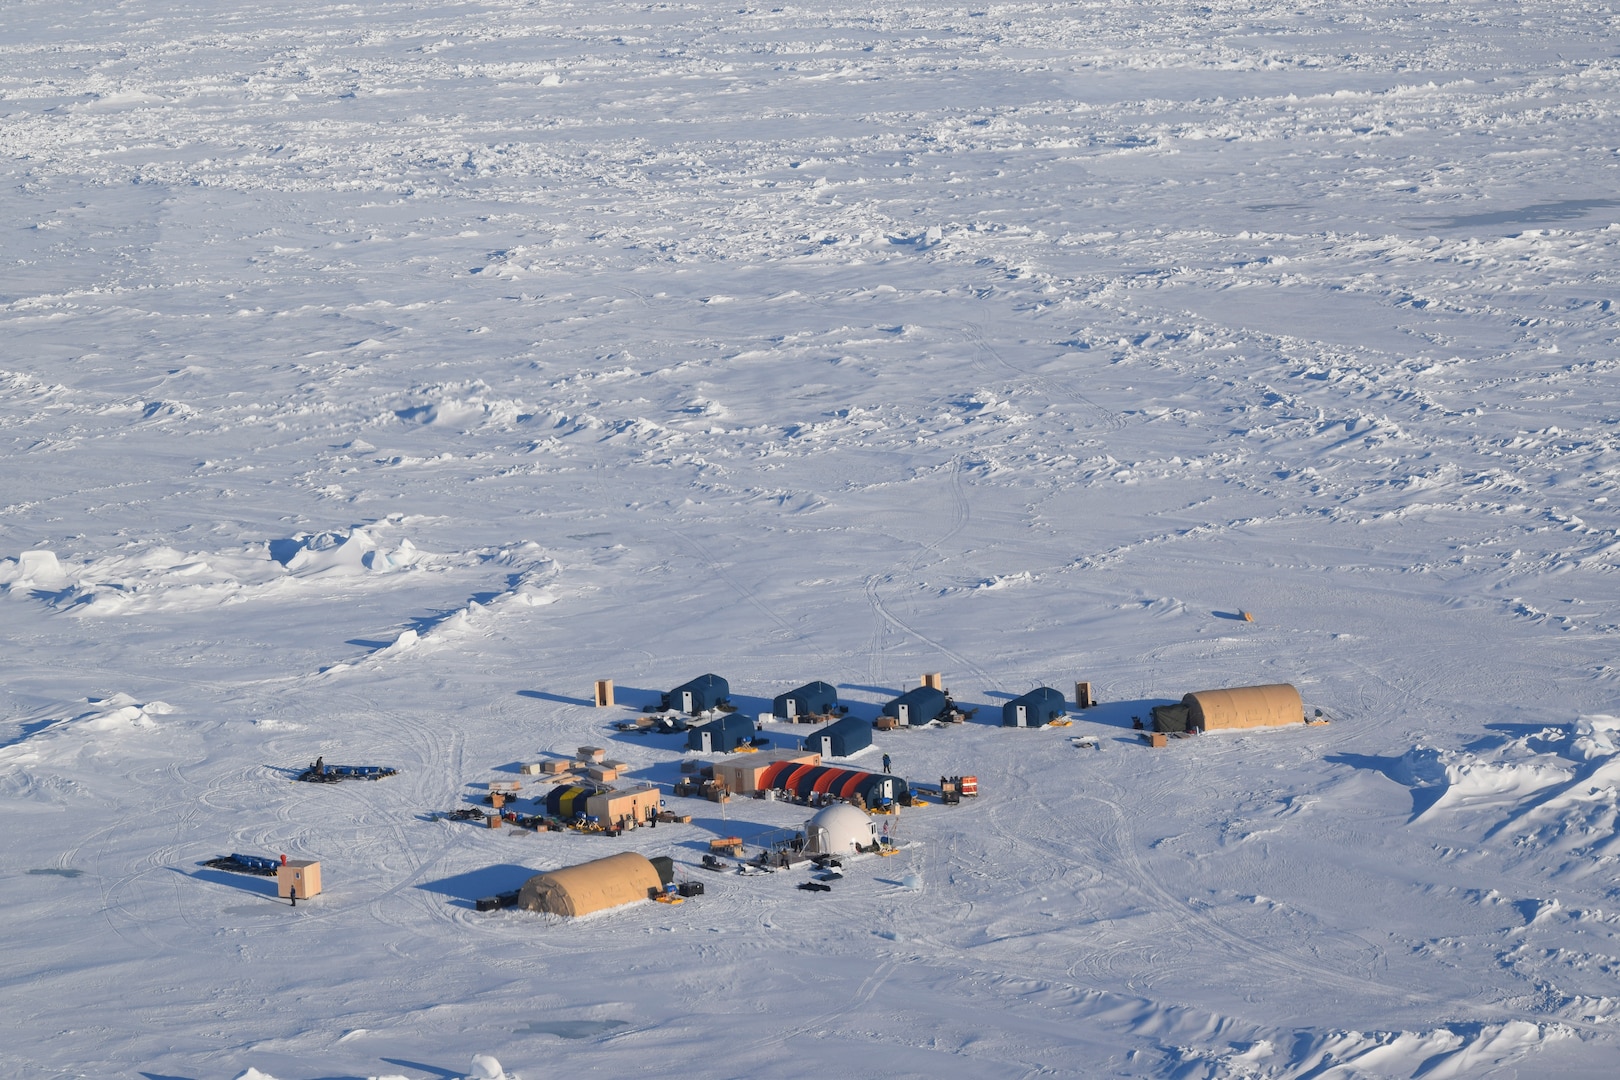 A tiny military camp is surrounded by a vast expanse of snow.